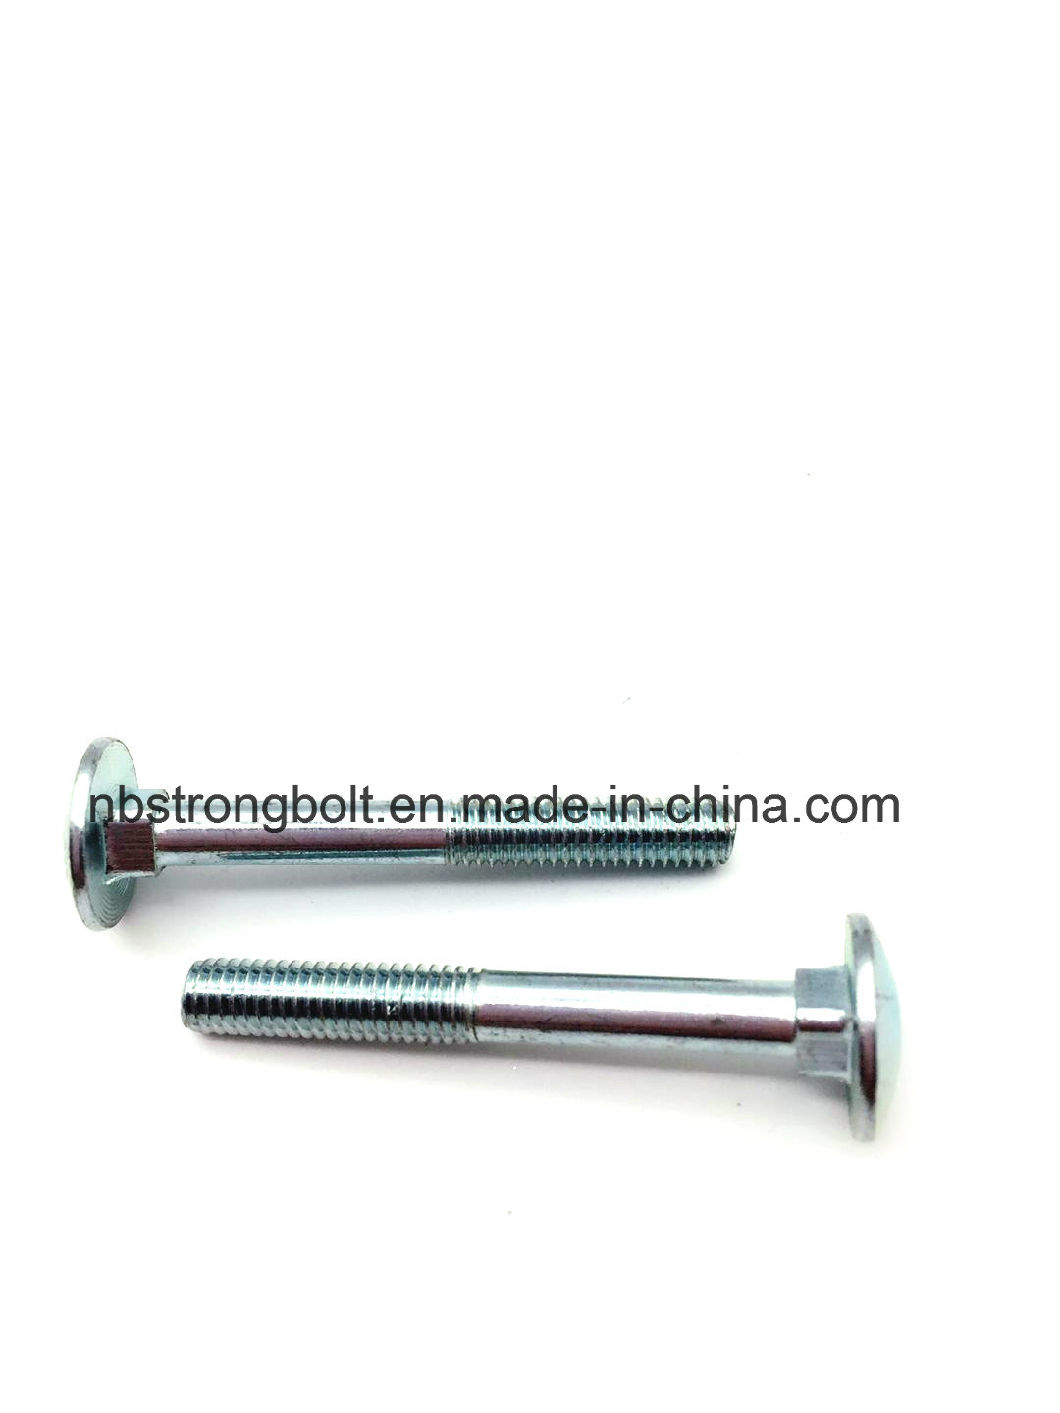 Round Head Square Neck Bolts, Mushroom Head Square Neck Bolts DIN603 Cl. 4.8 with White Zinc Plated M6X40 Half Thread